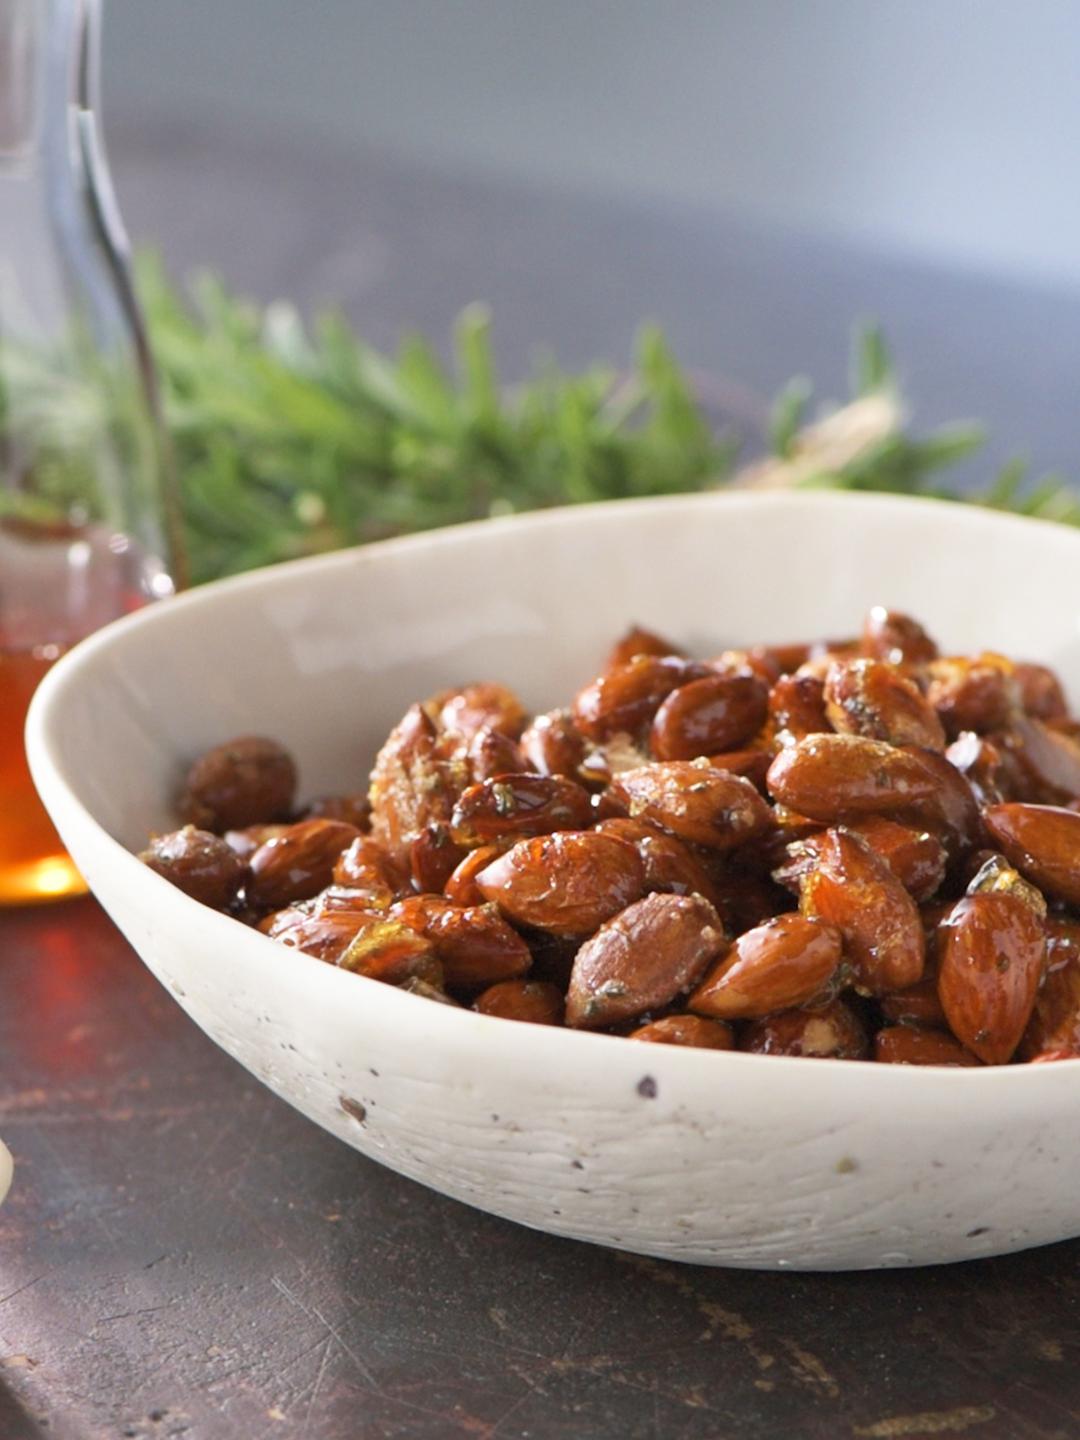 Honey and Rosemary Glazed Activated Almonds